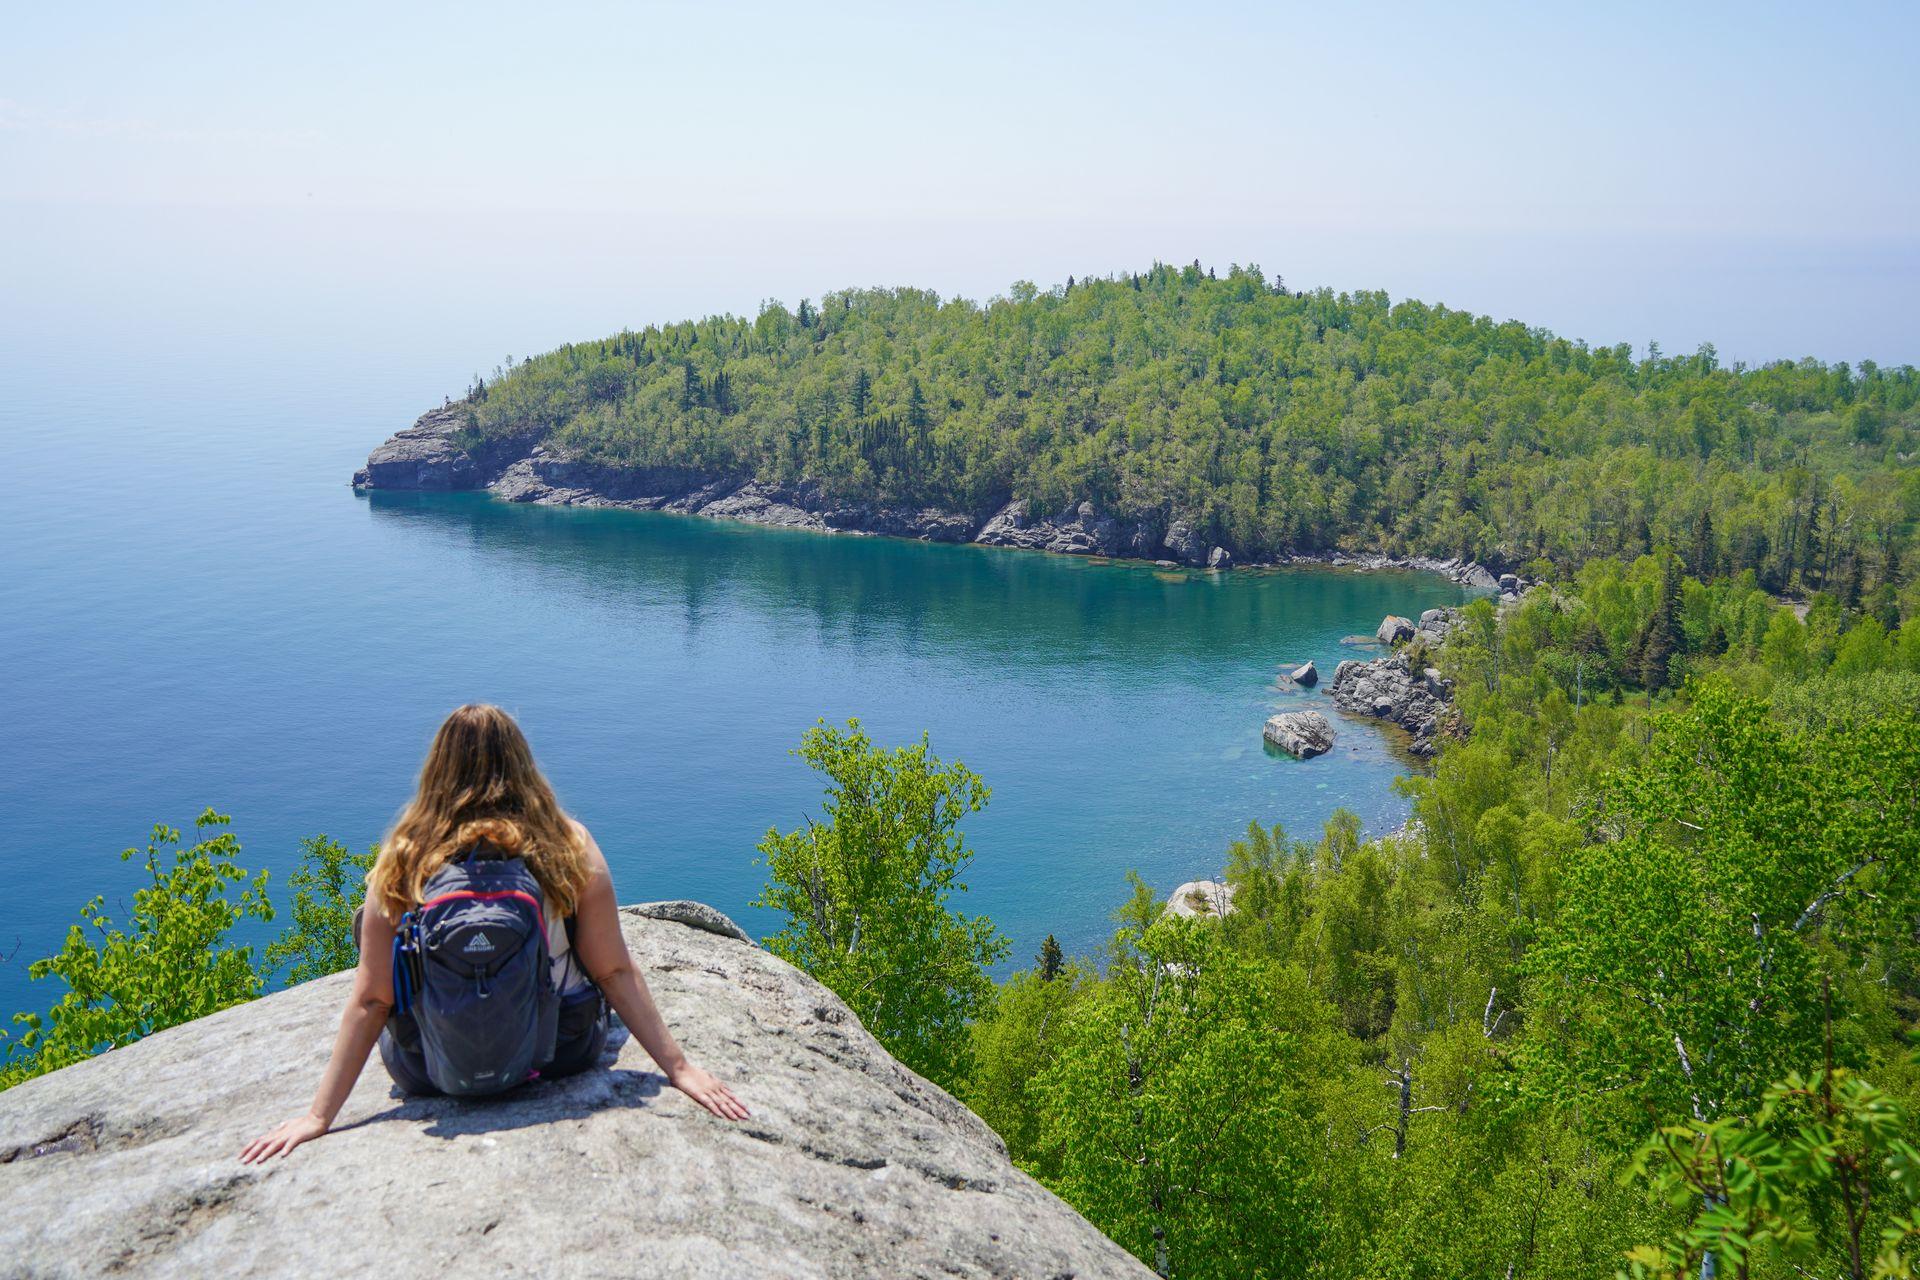 Lydia sitting on a rock and looking out at Lake Superior and a peninsula extending out into the water